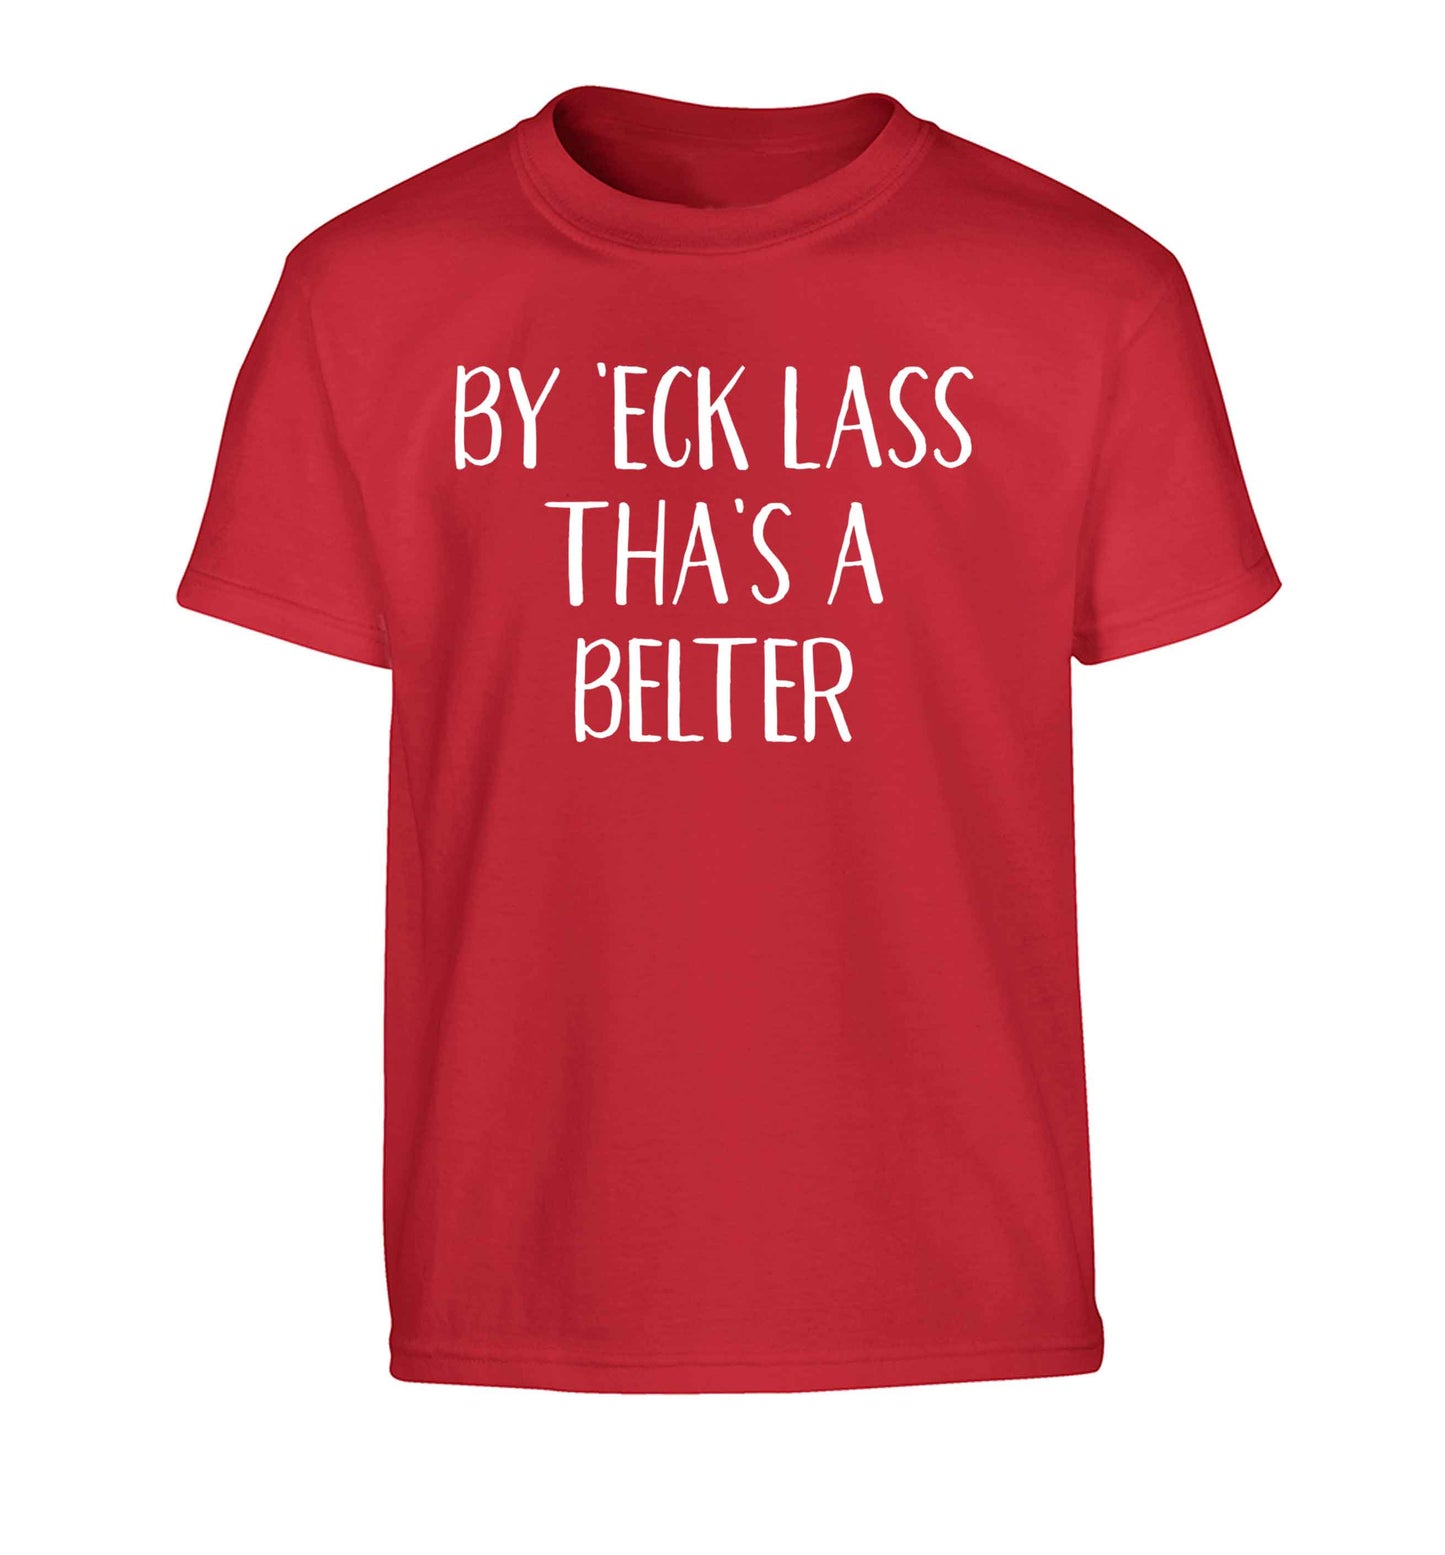 Be 'eck lass tha's a belter Children's red Tshirt 12-13 Years